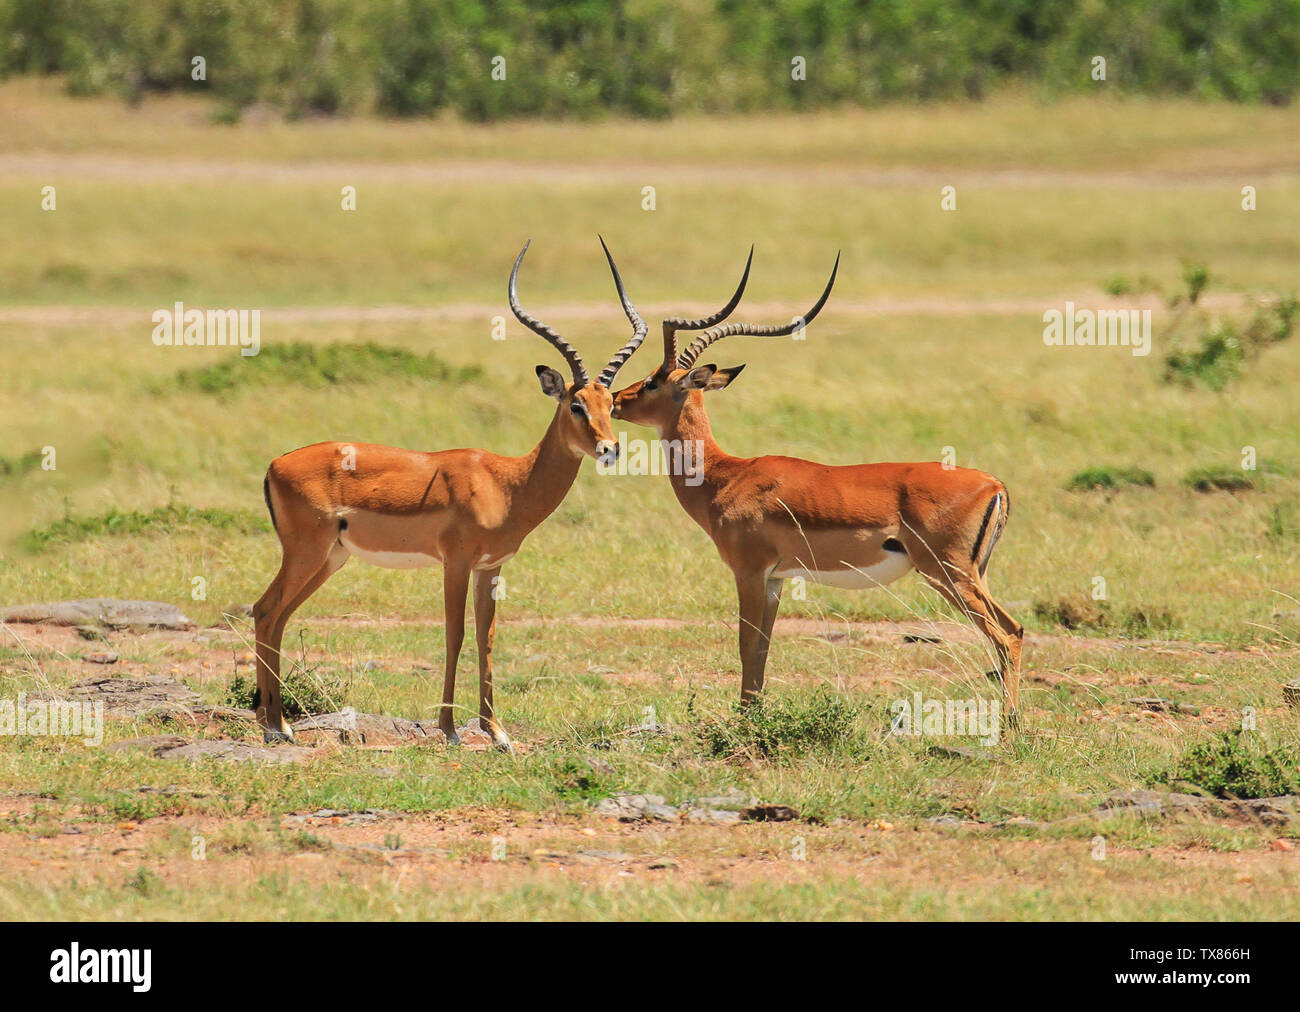 Two Impalas High Resolution Stock Photography And Images Alamy